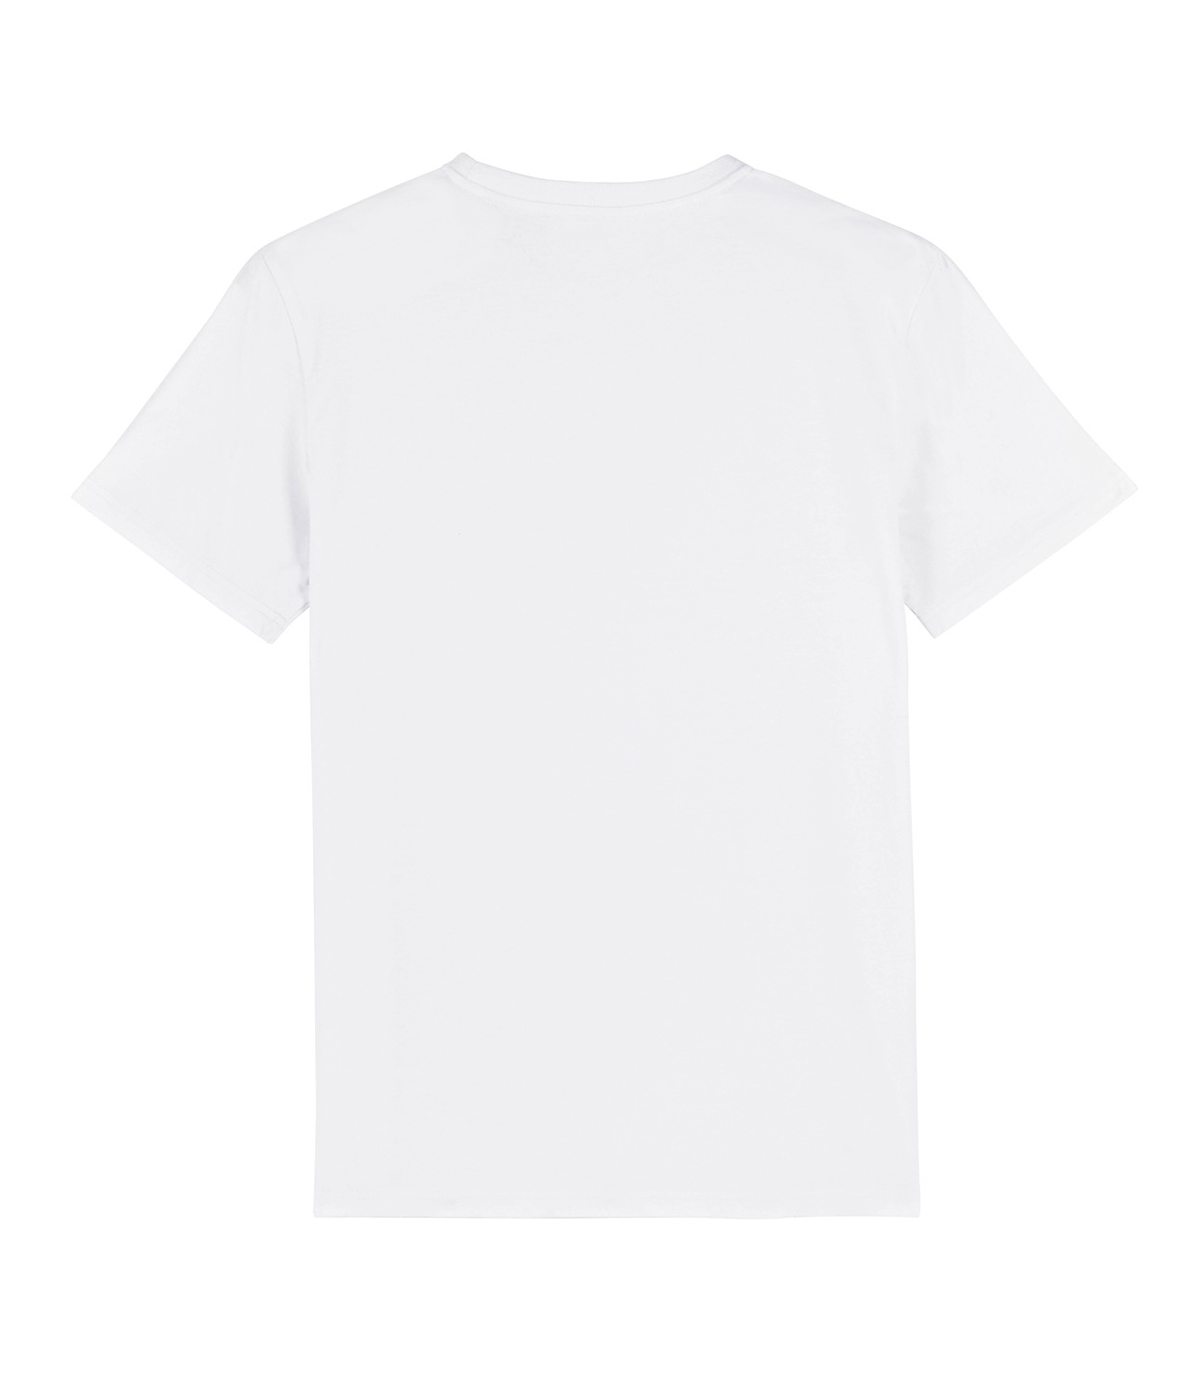 Back of Beachlife white organic cotton unisex t-shirt with round neck by Mauverien.